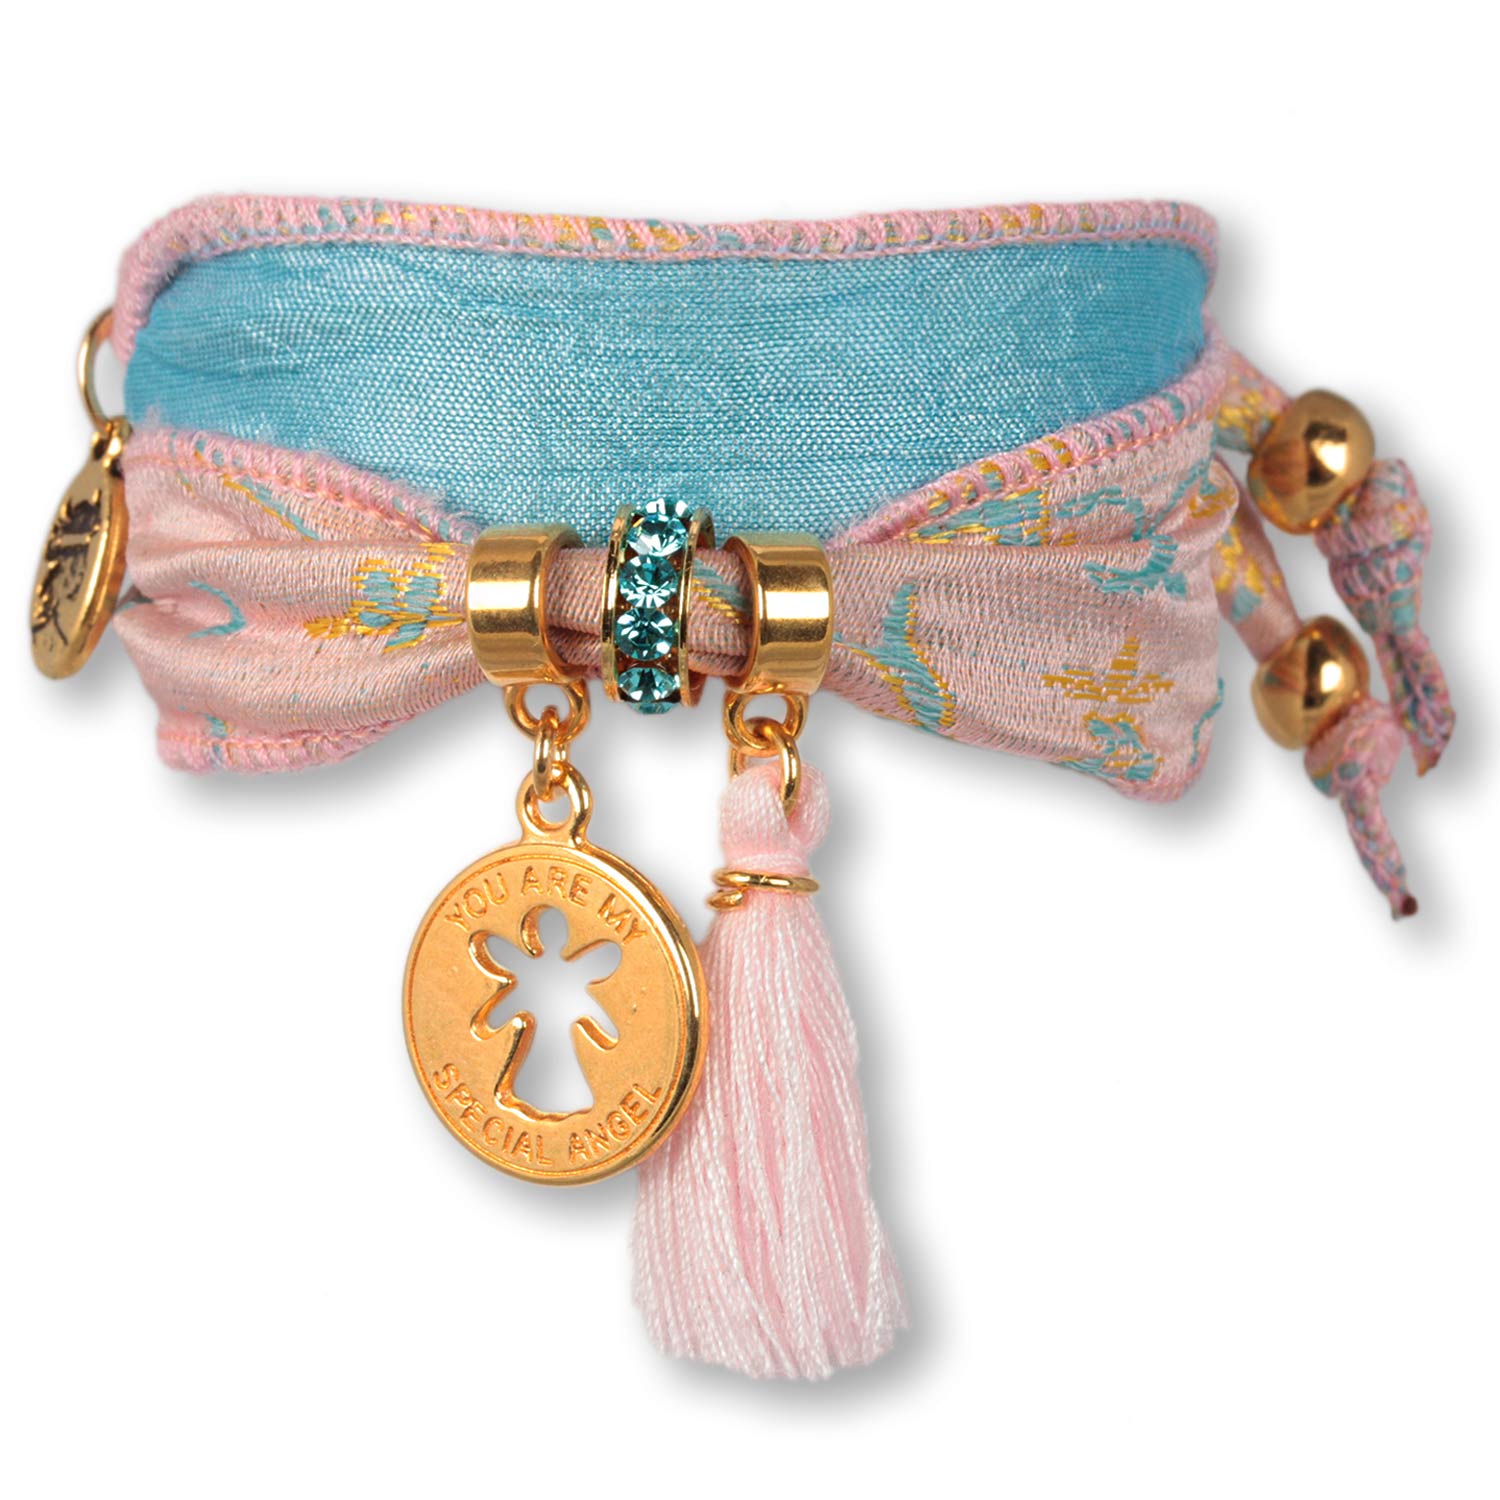 Baby Blue - Special Angel friendship bracelet from indian saris